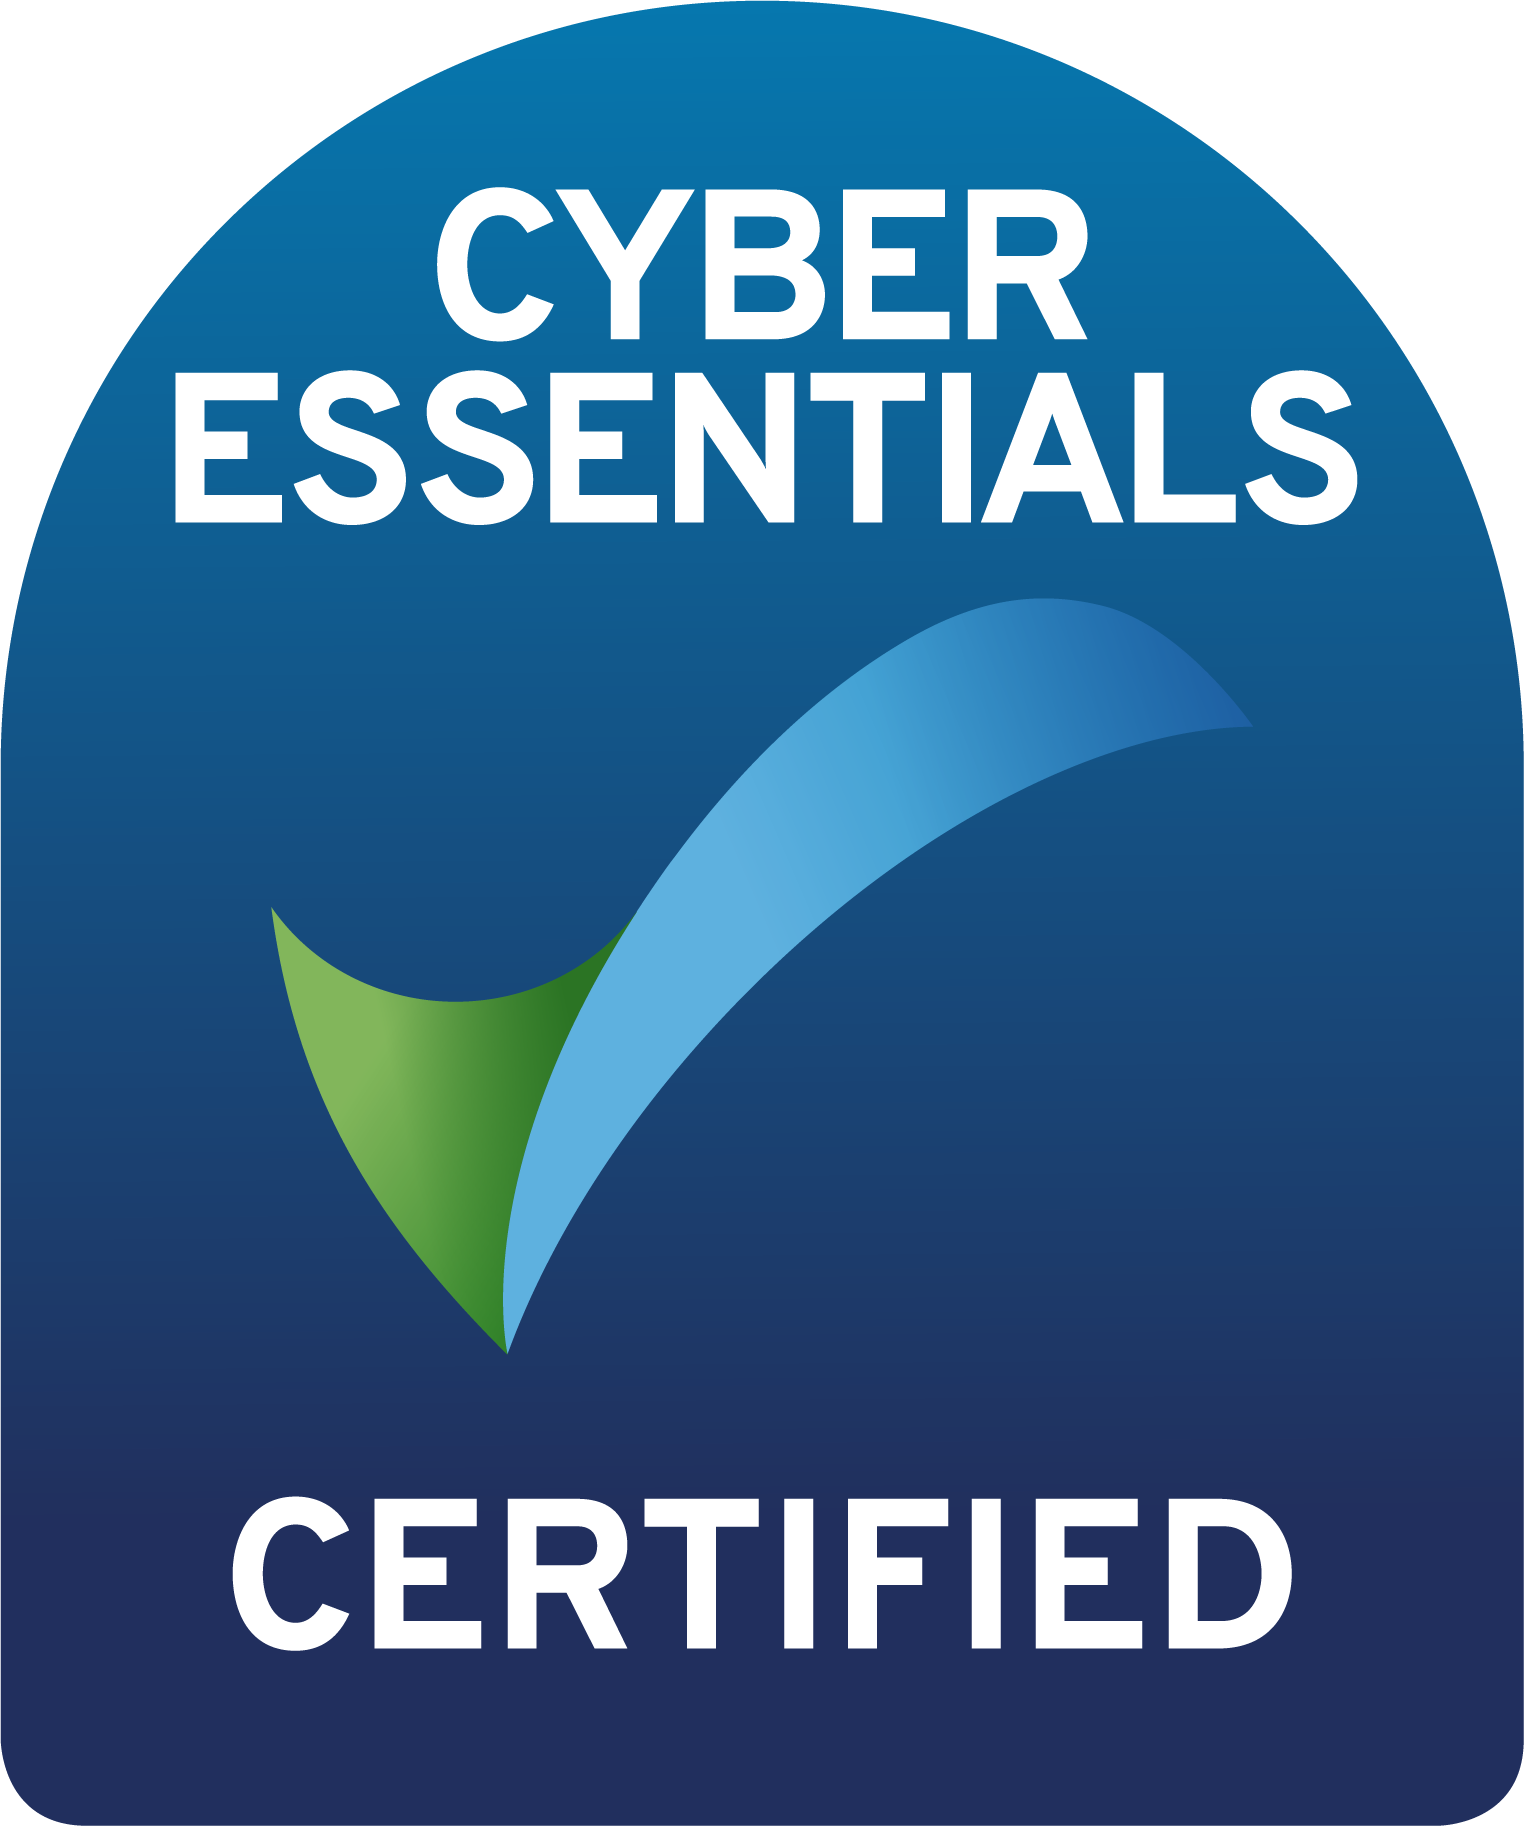 cyberessentials_certification mark_colour.png